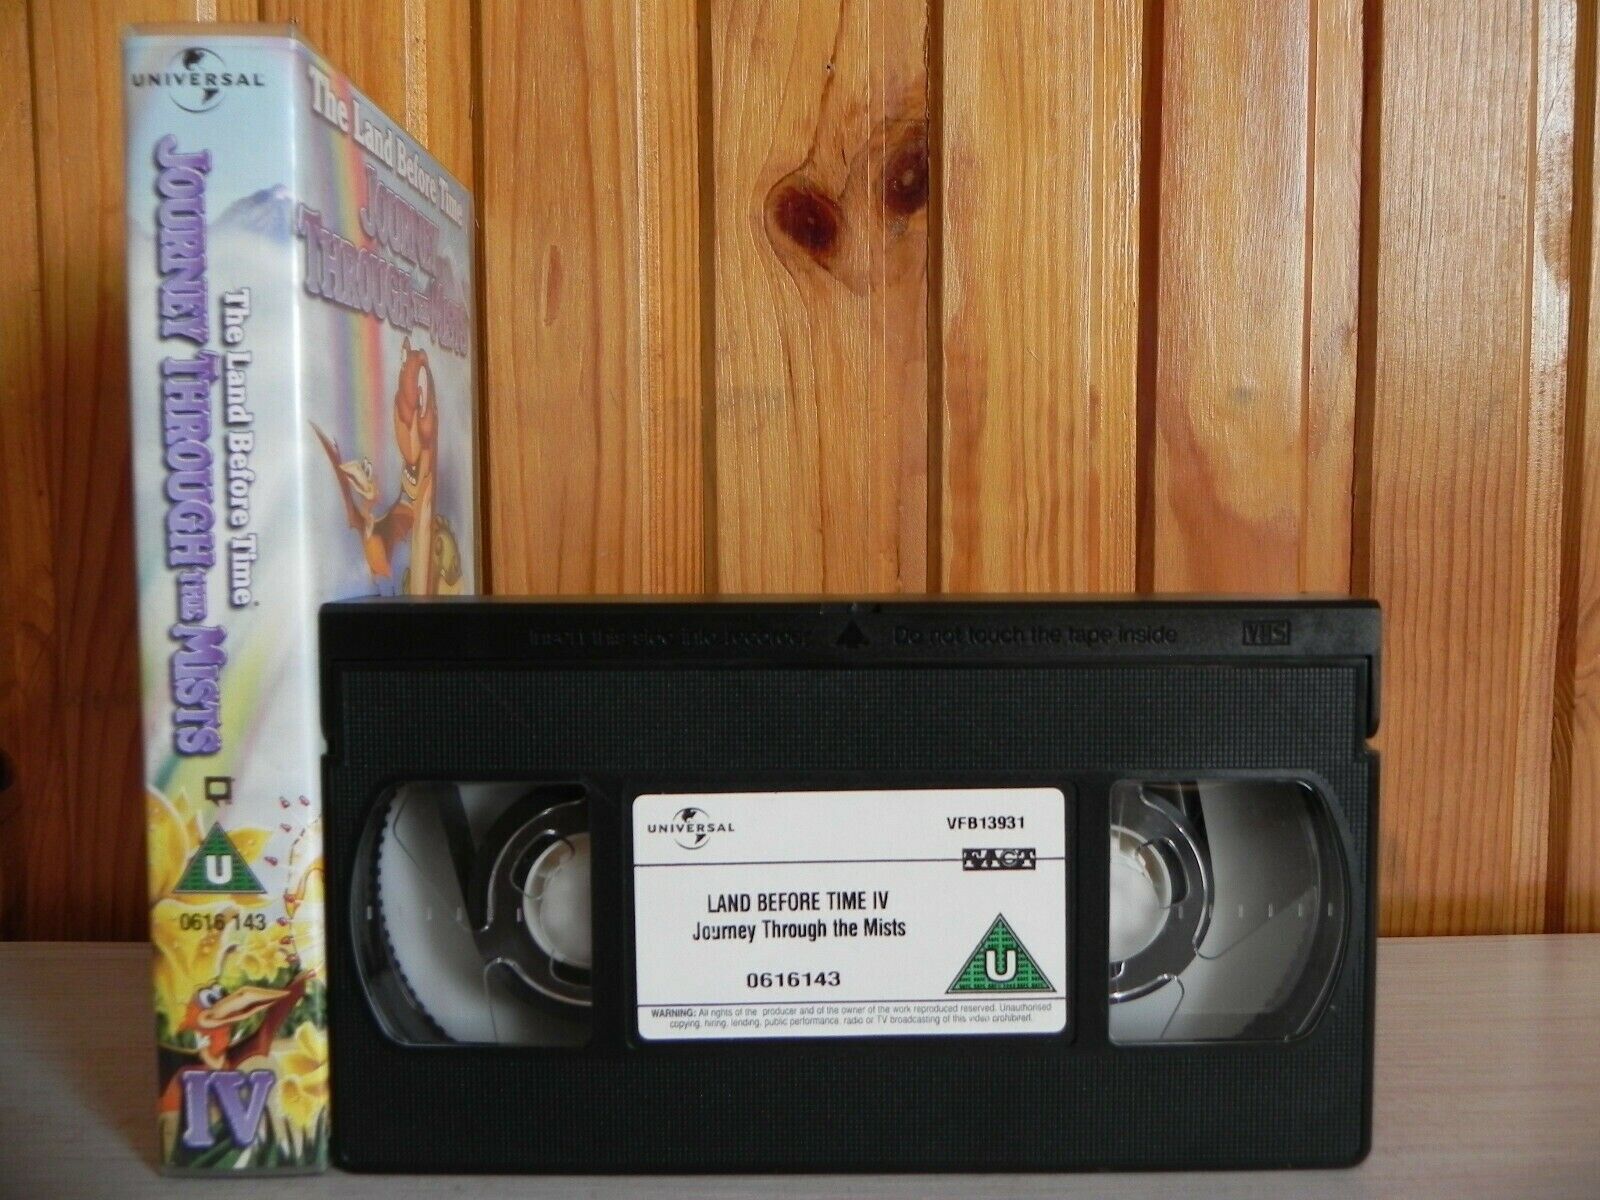 The Land Before Time - Journey Through The Mists - Universal - Adventure - VHS-